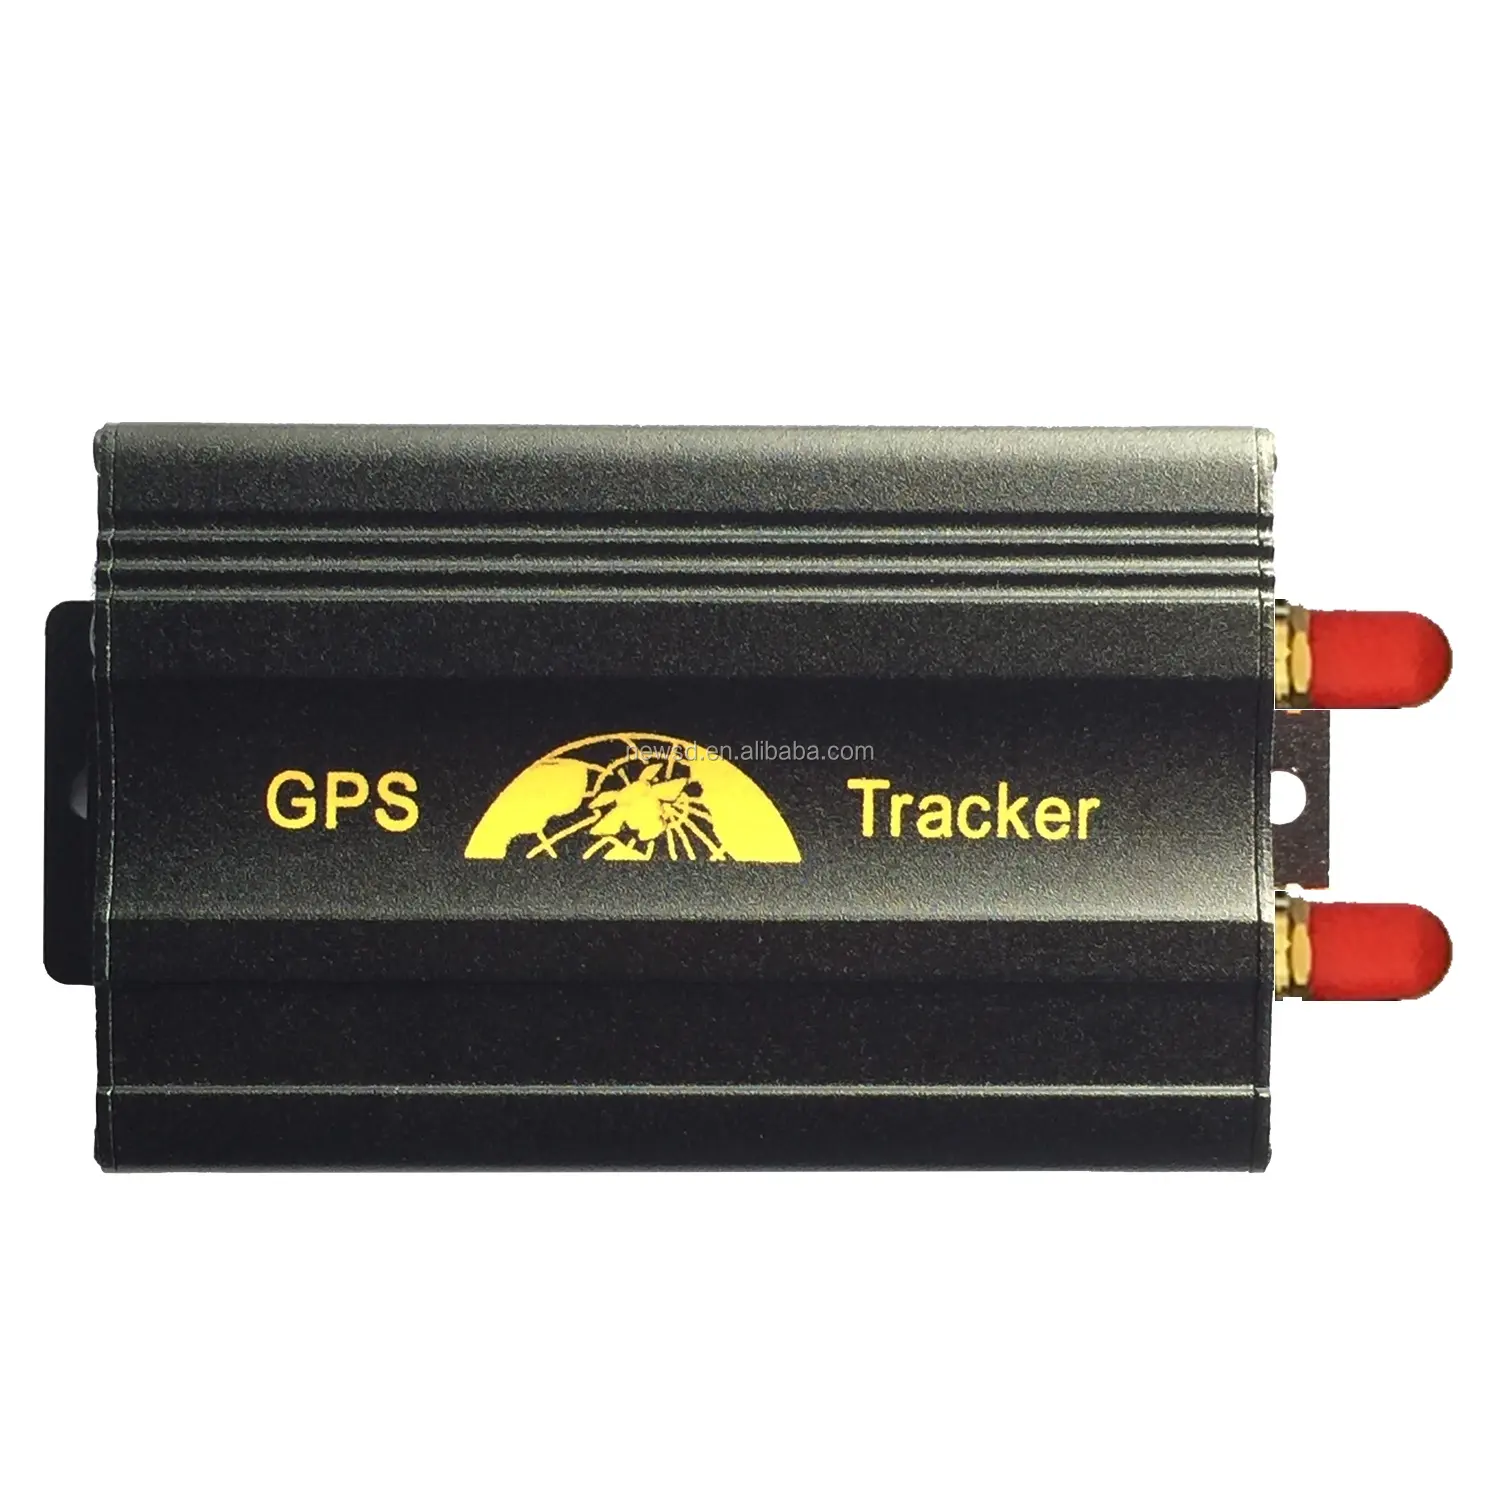 localizador gps tracker mobile phone map gps cell phone tracker tk103a